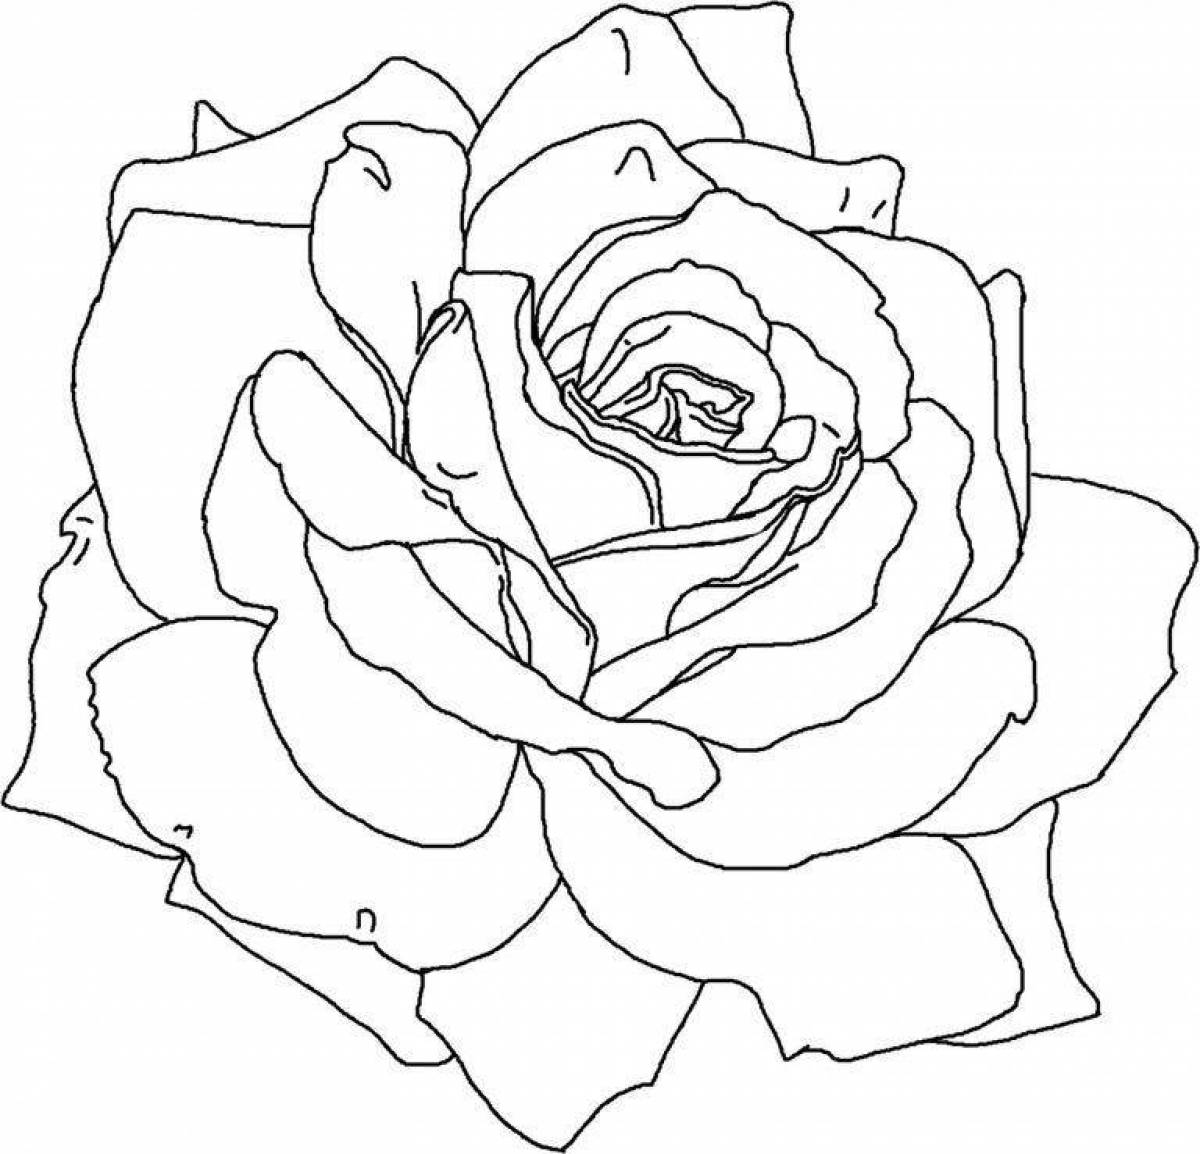 Majestic coloring page drawing roses